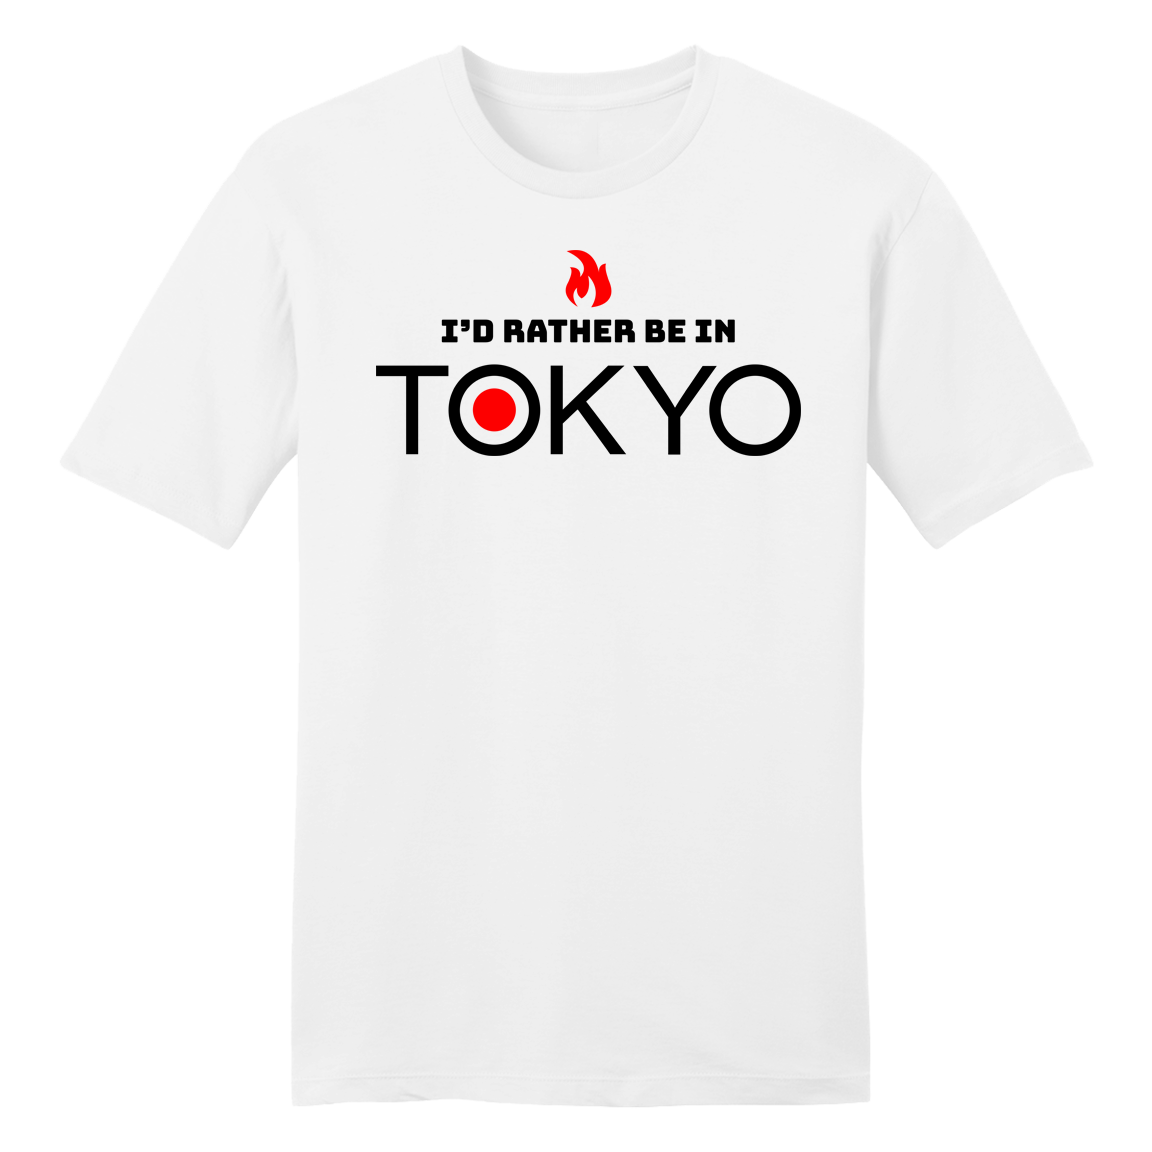 I'd Rather Be In Tokyo - Cincy Shirts